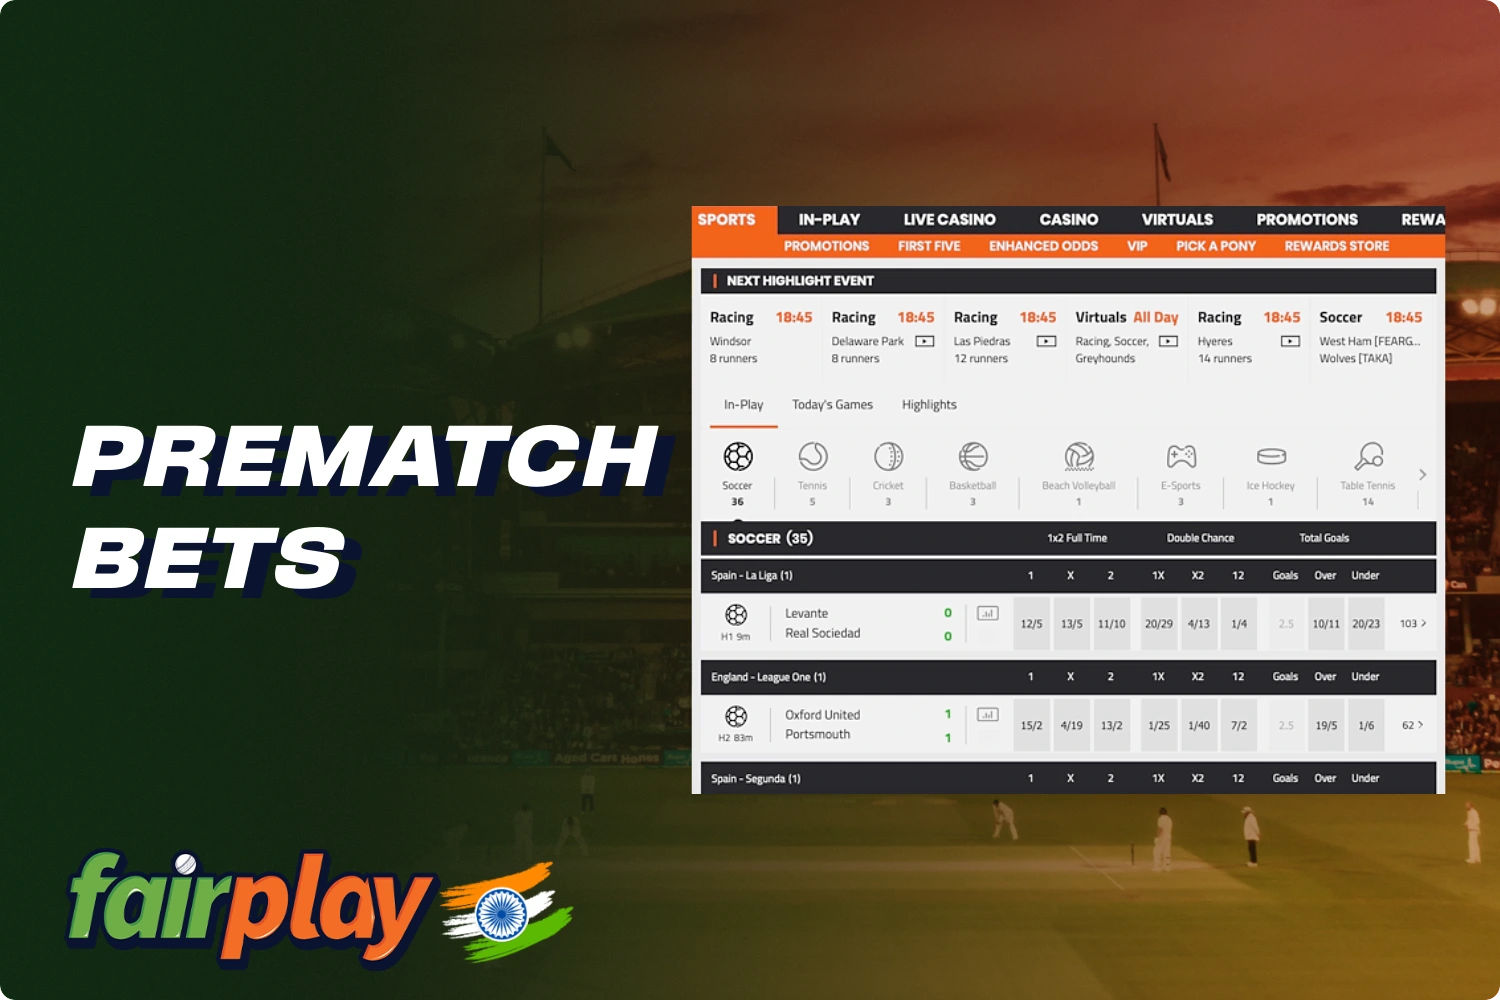 Pre-match betting at Fairplay is particularly popular among players from India